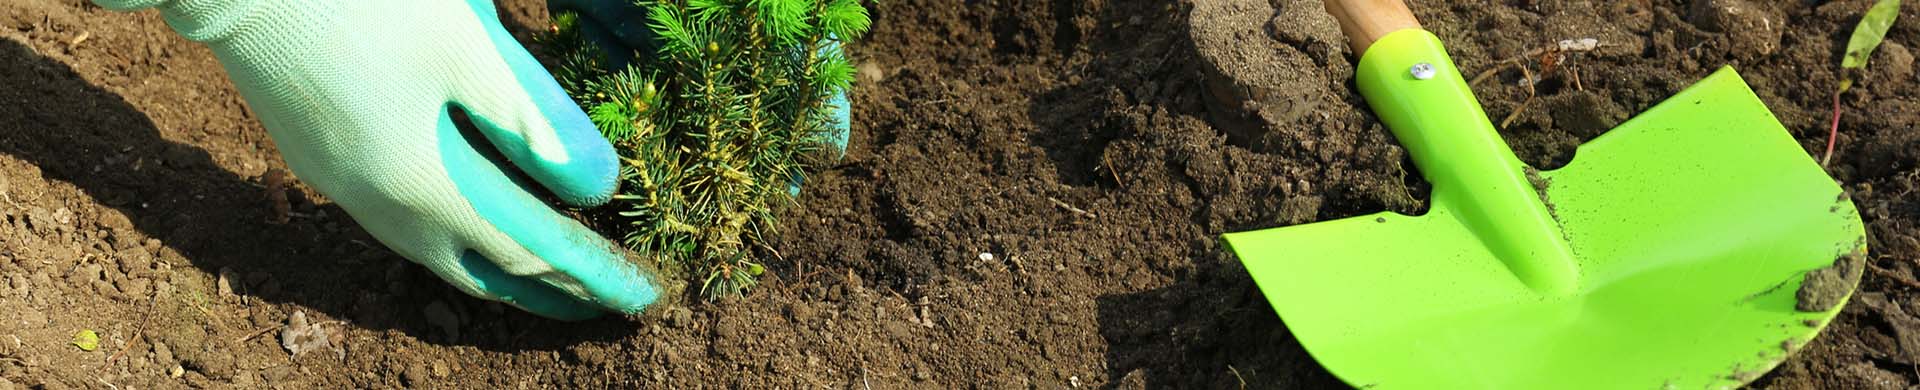 Close-up of Gloved Hands Planting a Small Pine Tree